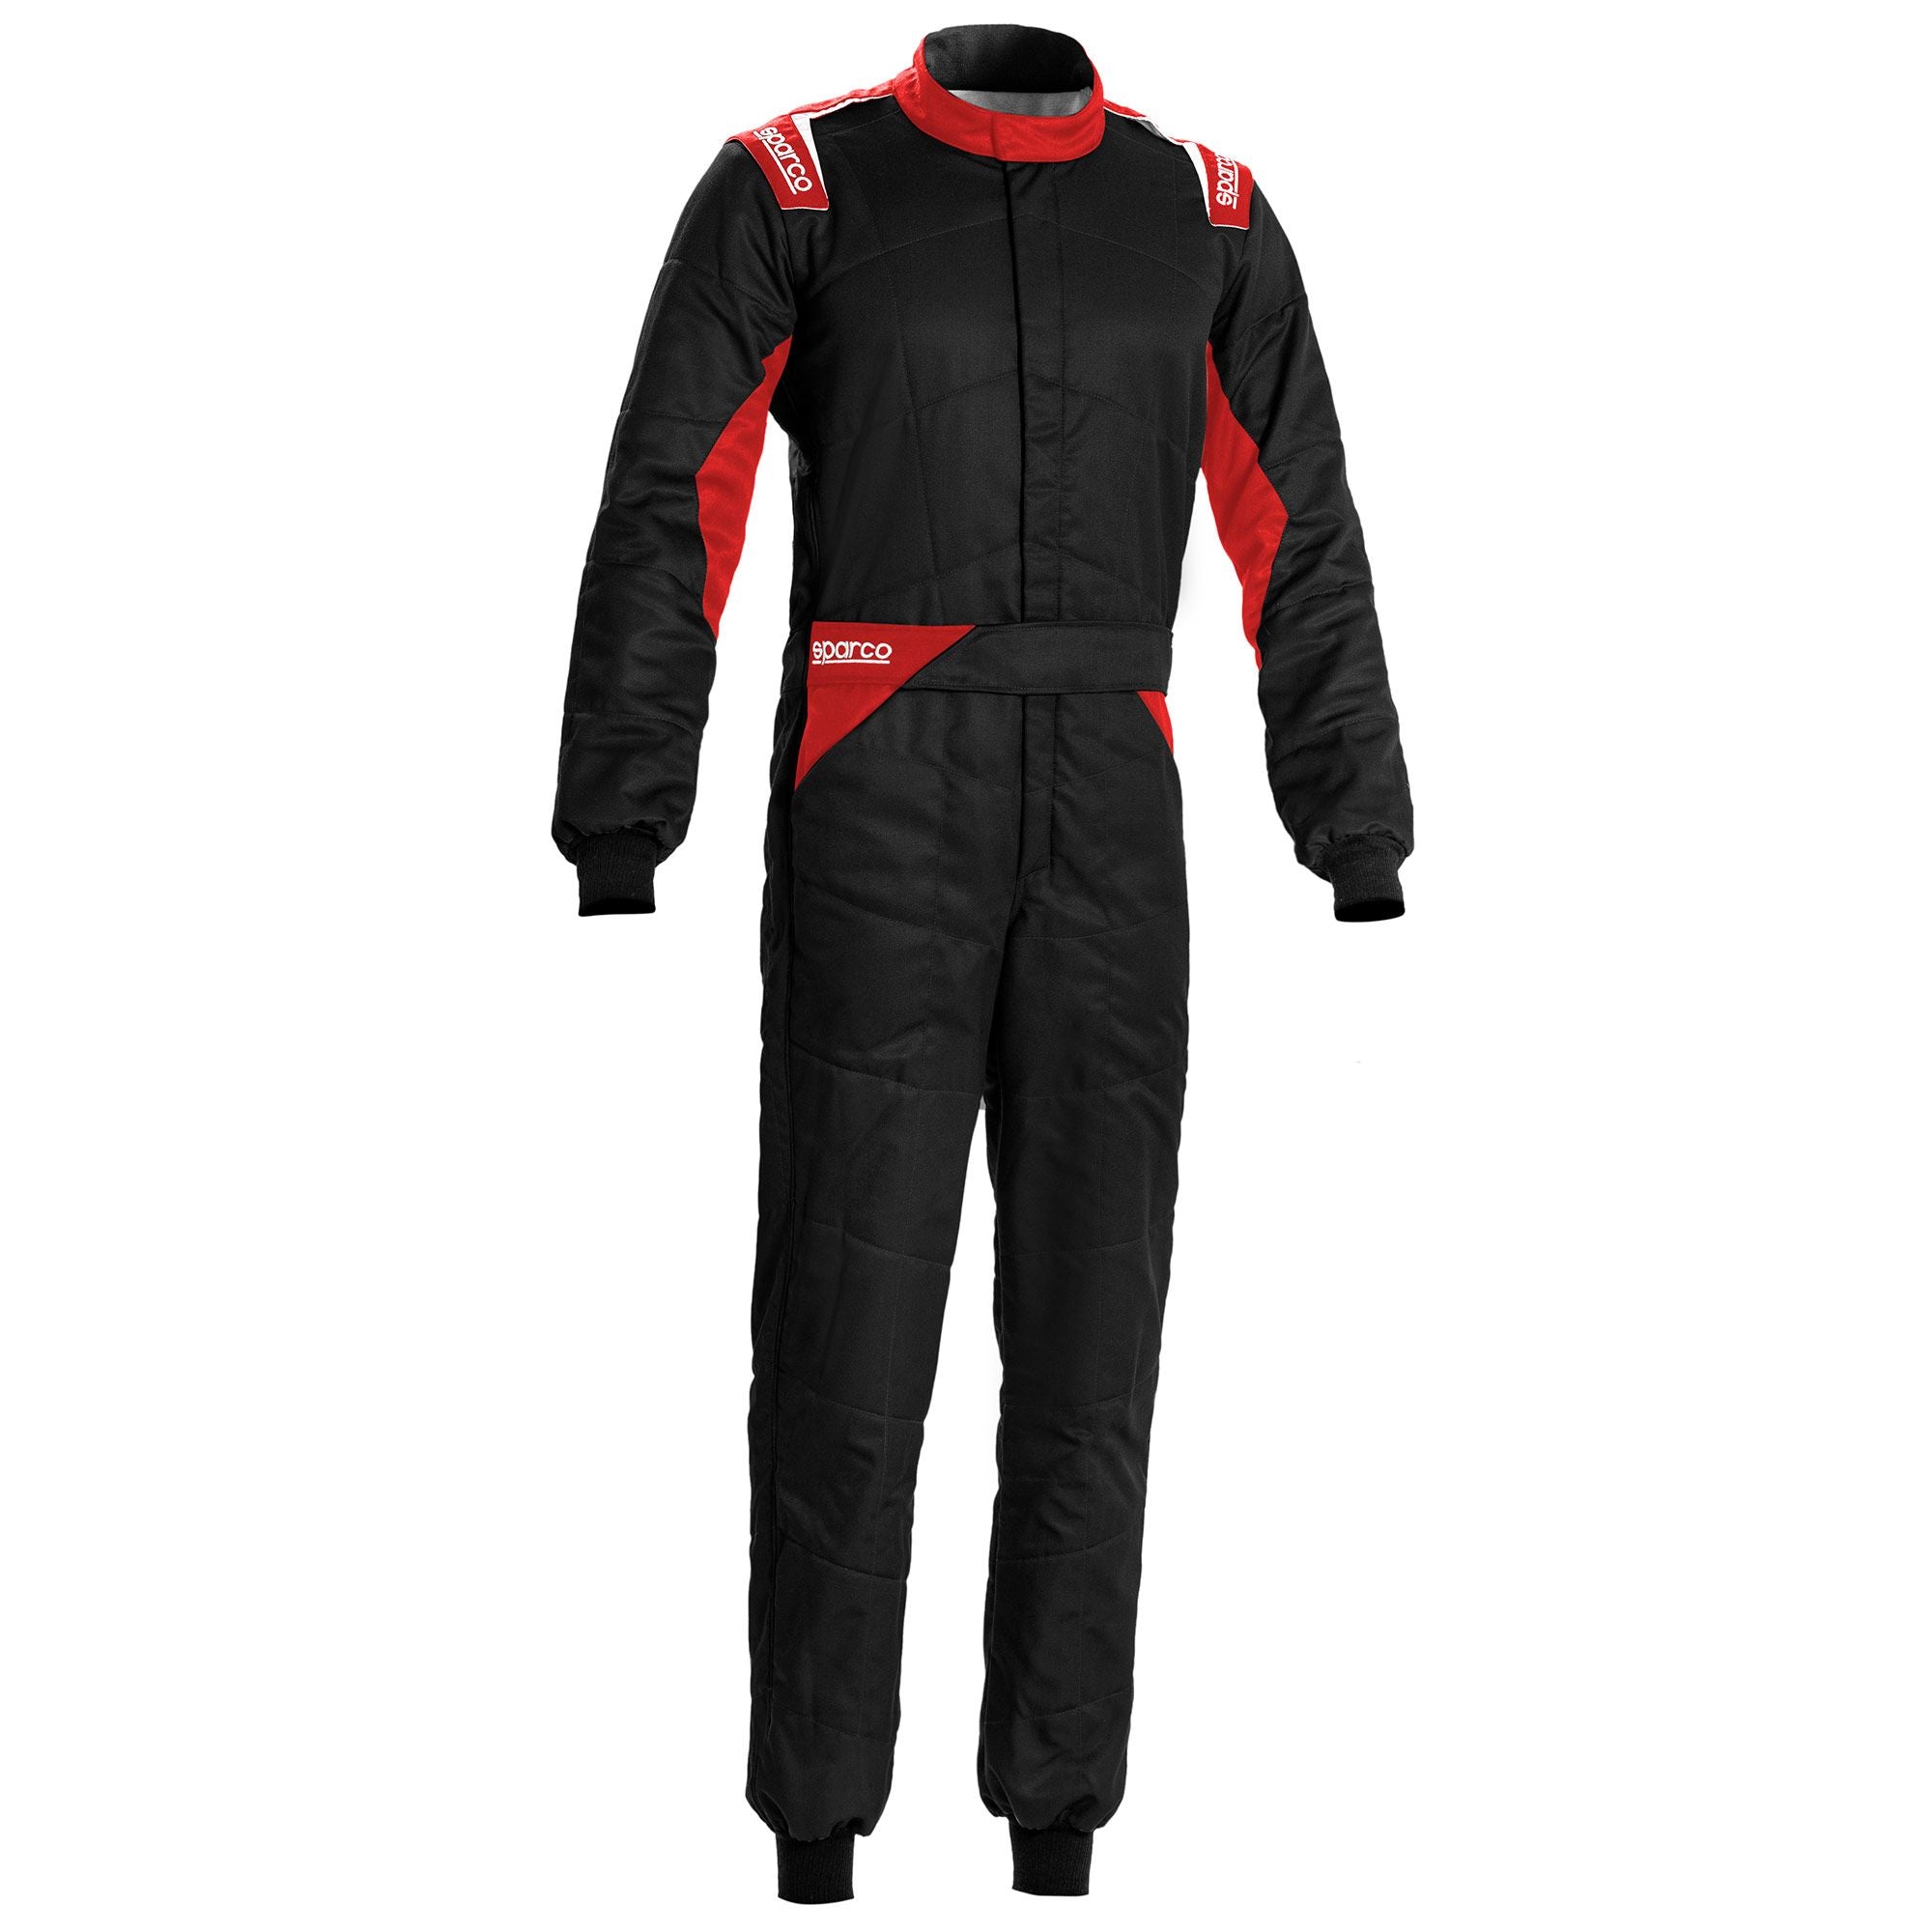 SPARCO 00109362NRRS SPRINT 2022 Racing suit, FIA 8856-2018, black/red, size 62 Photo-0 